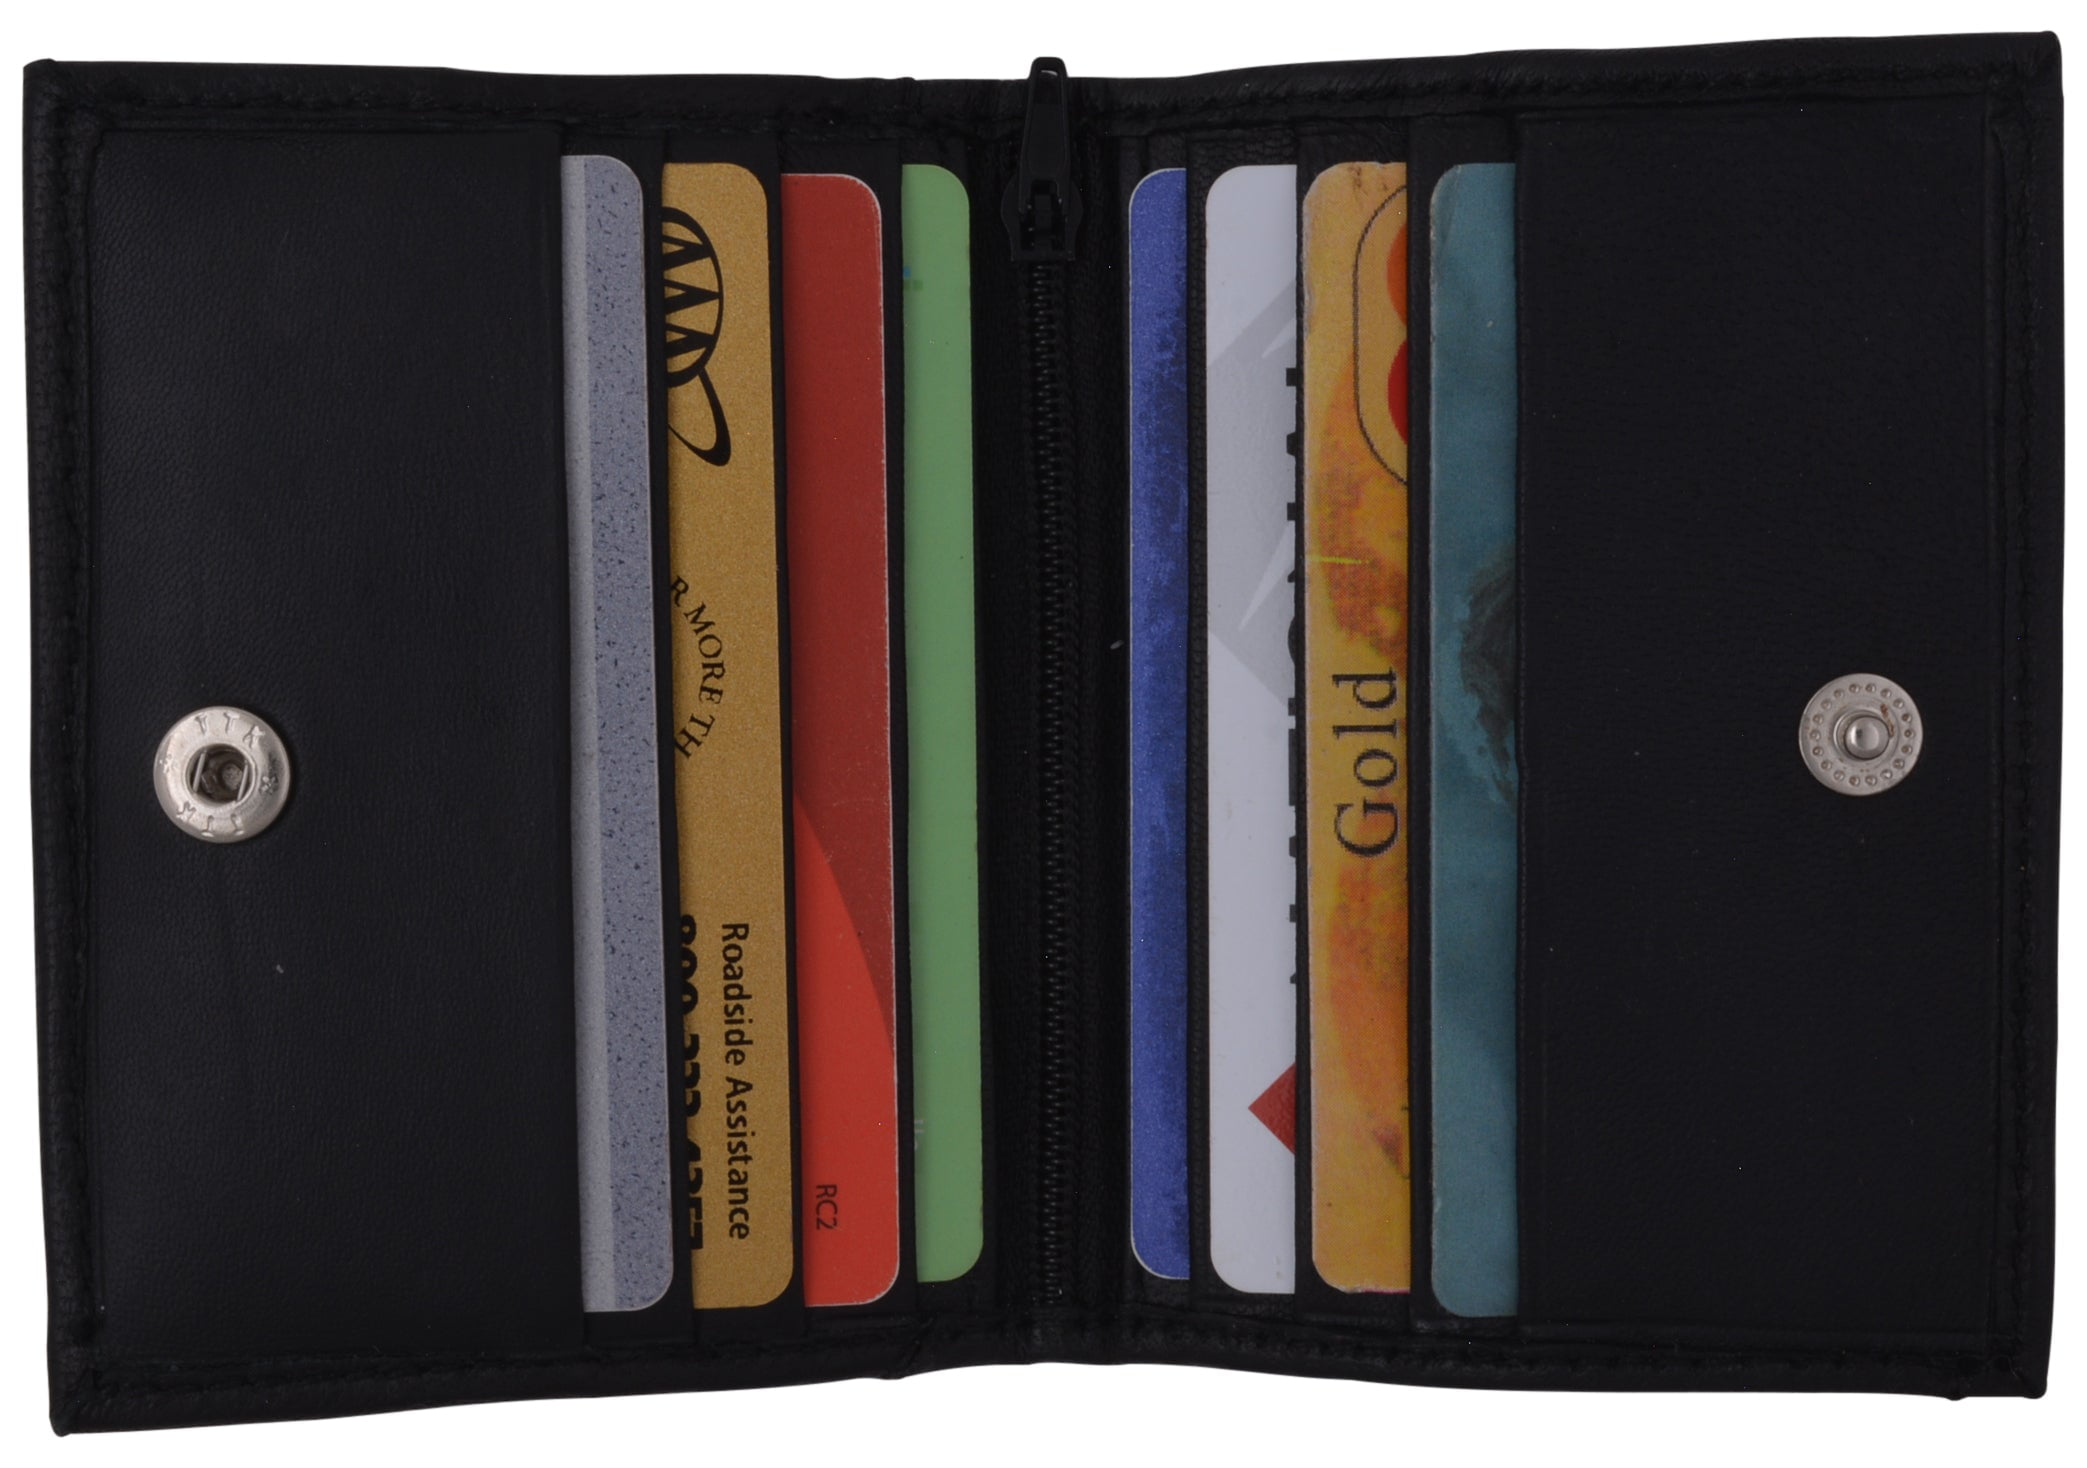 Wallets & purses Céline - Card holder with zip in black